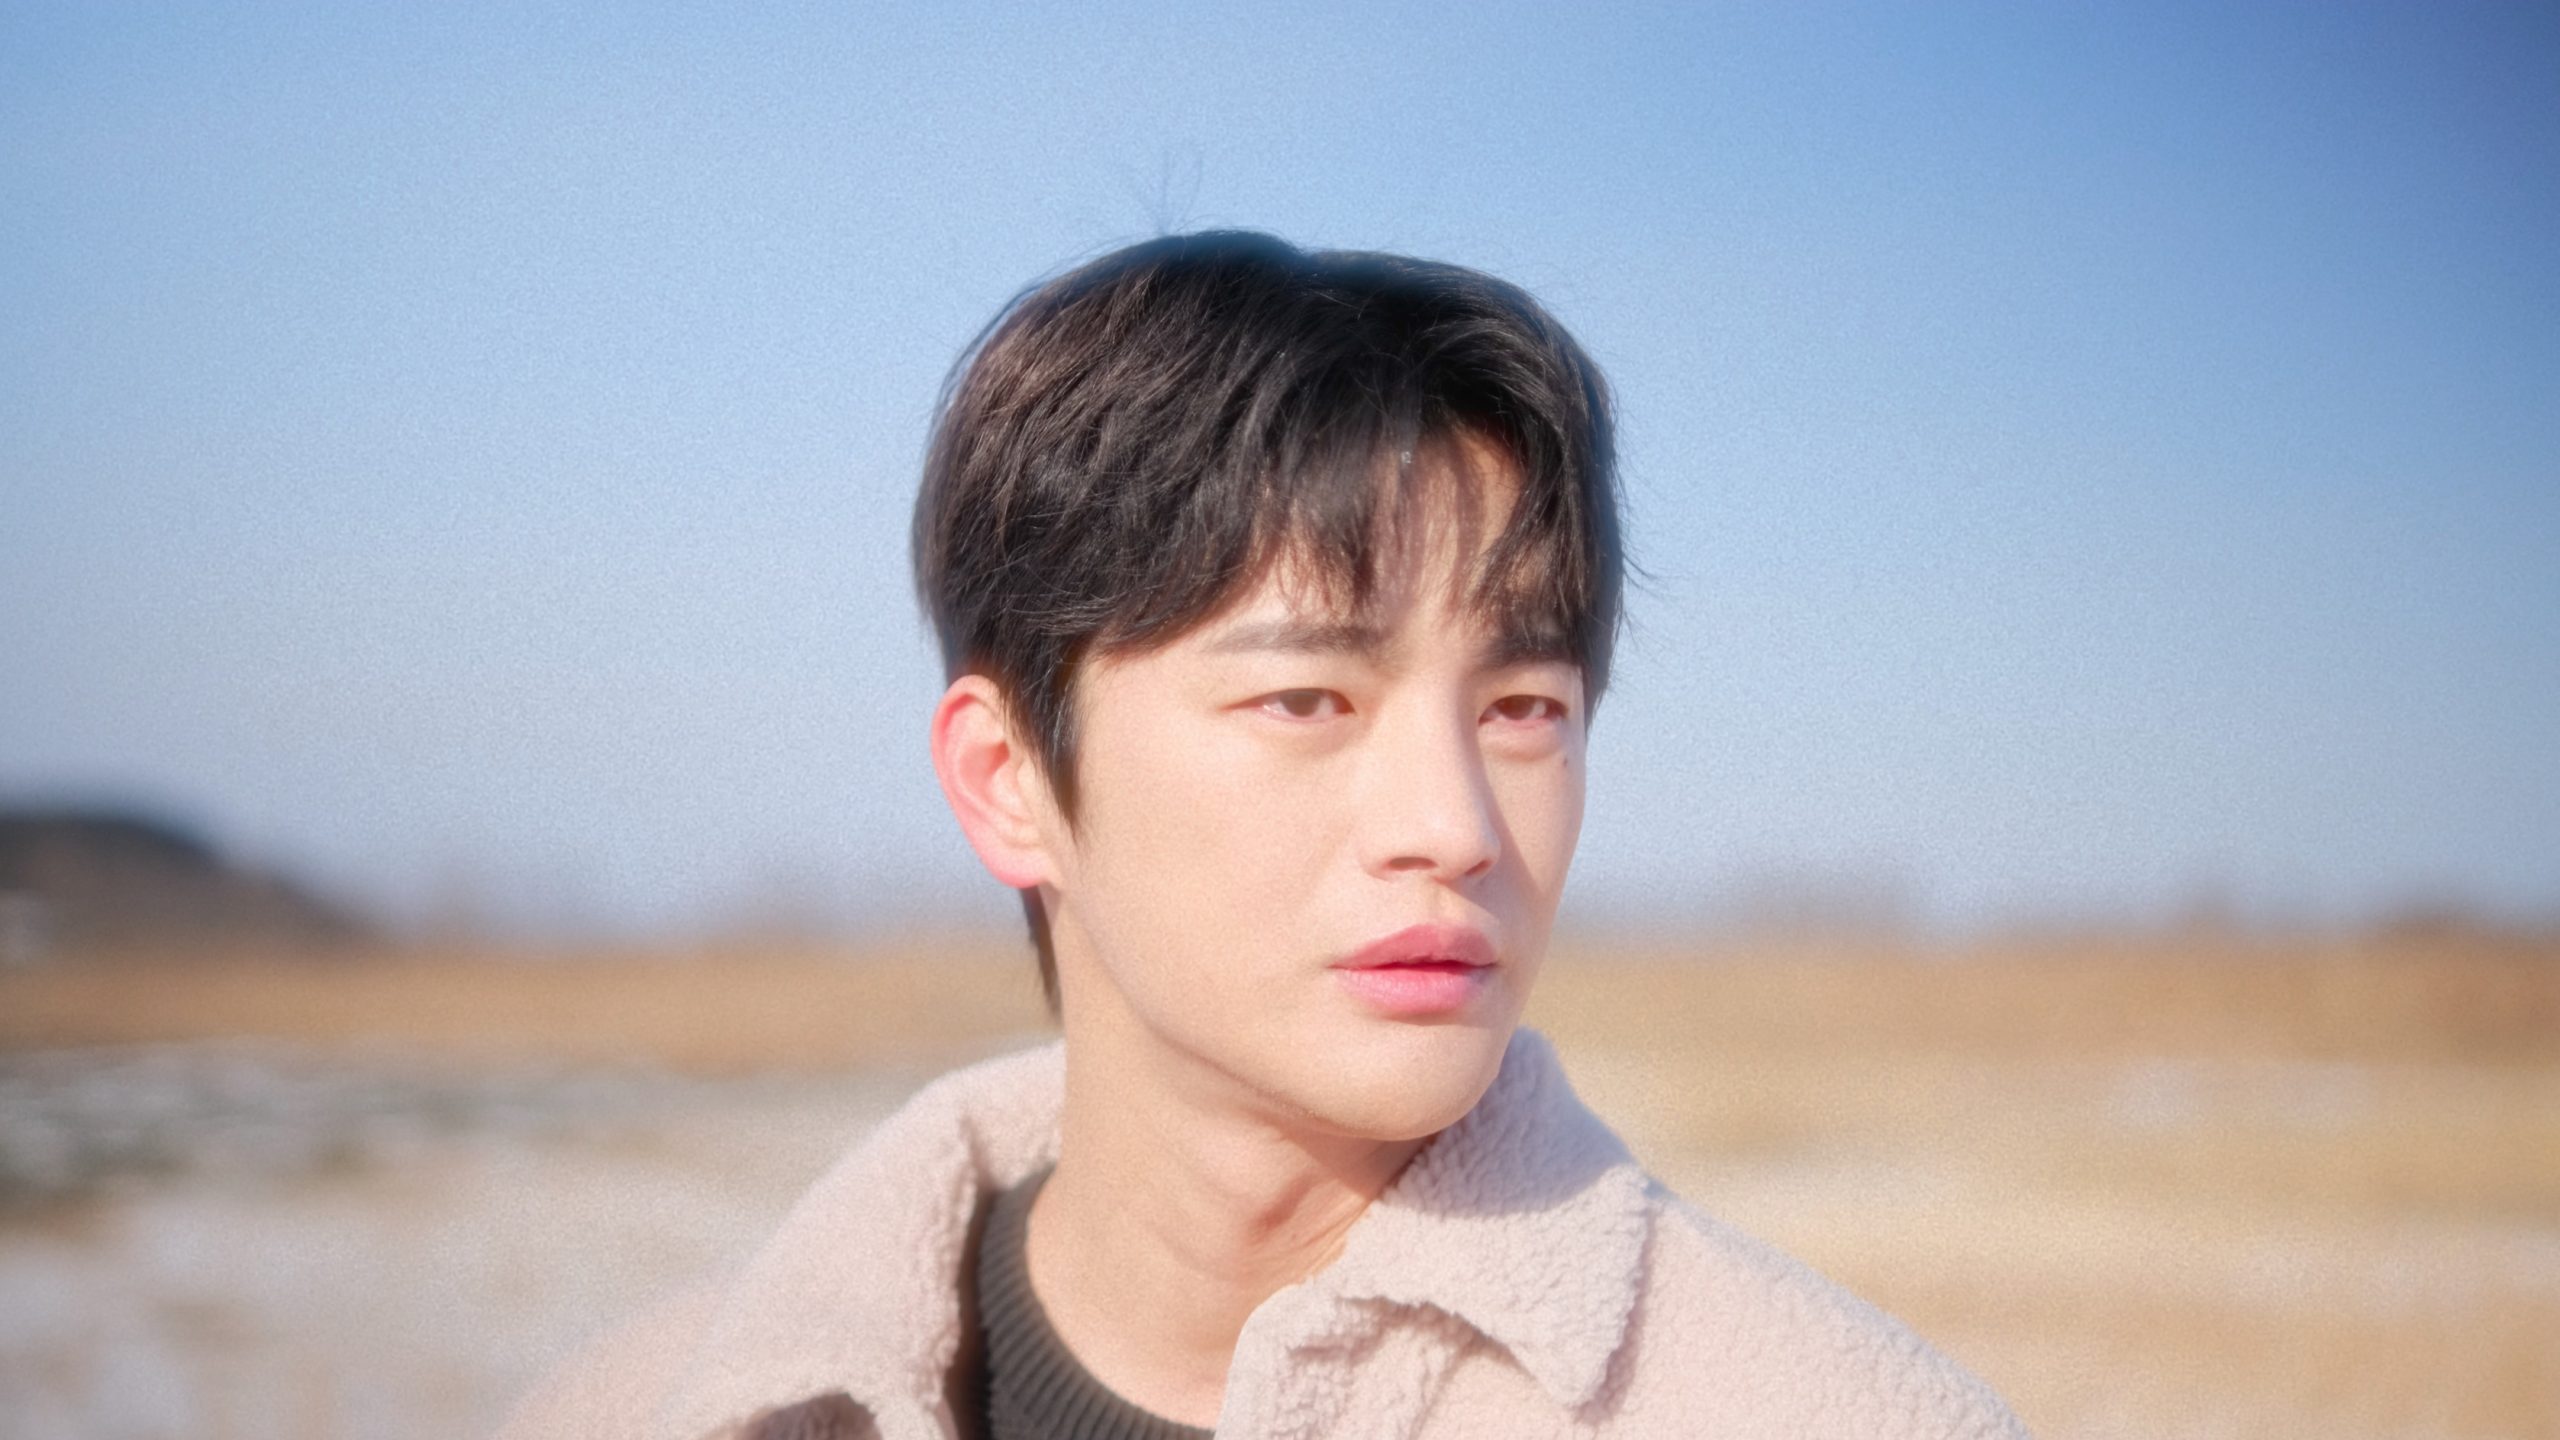 TRAP by SEO IN GUK